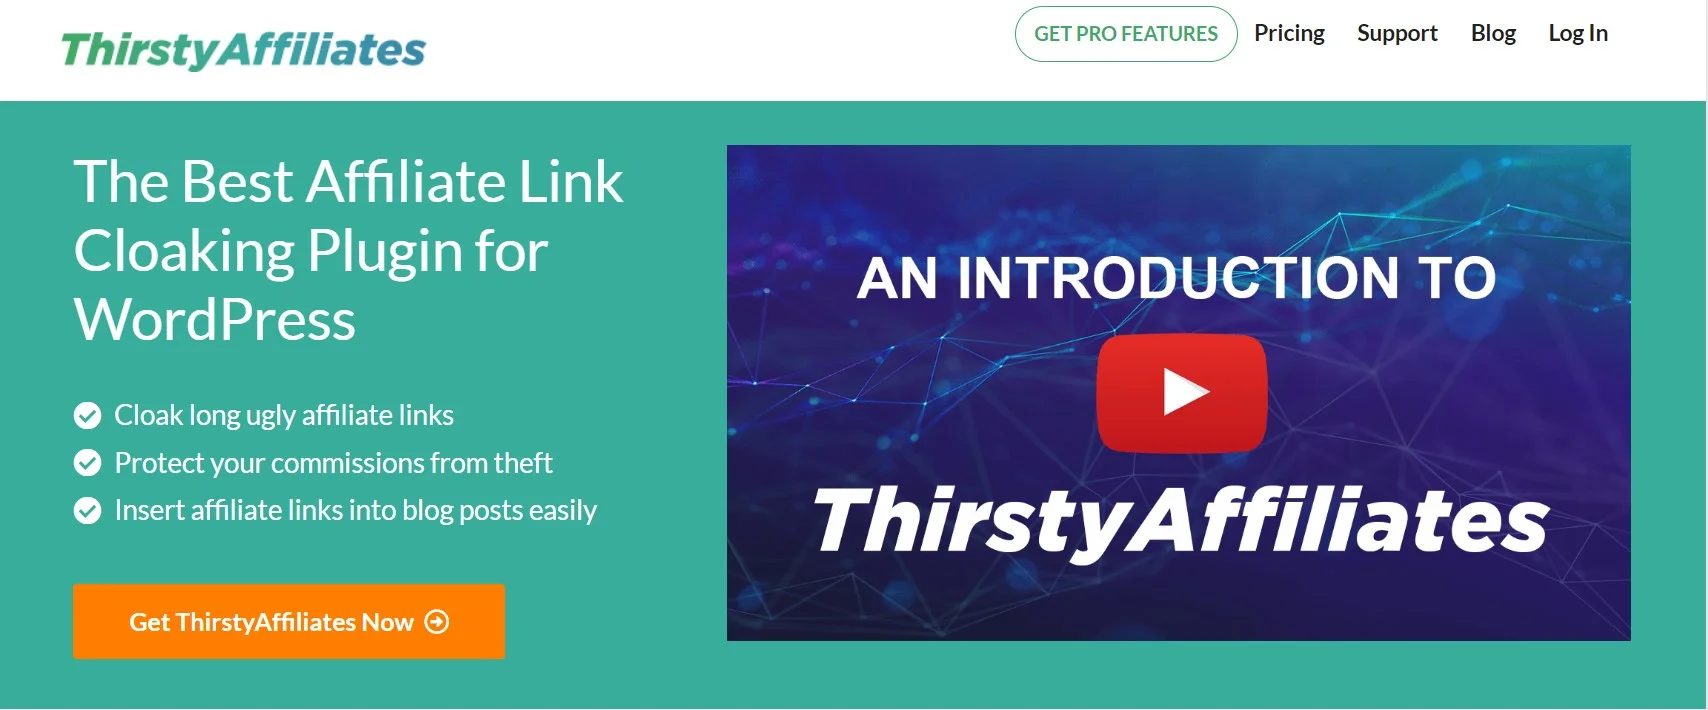 Thirstyaffiliates Helps With Affiliate Marketing